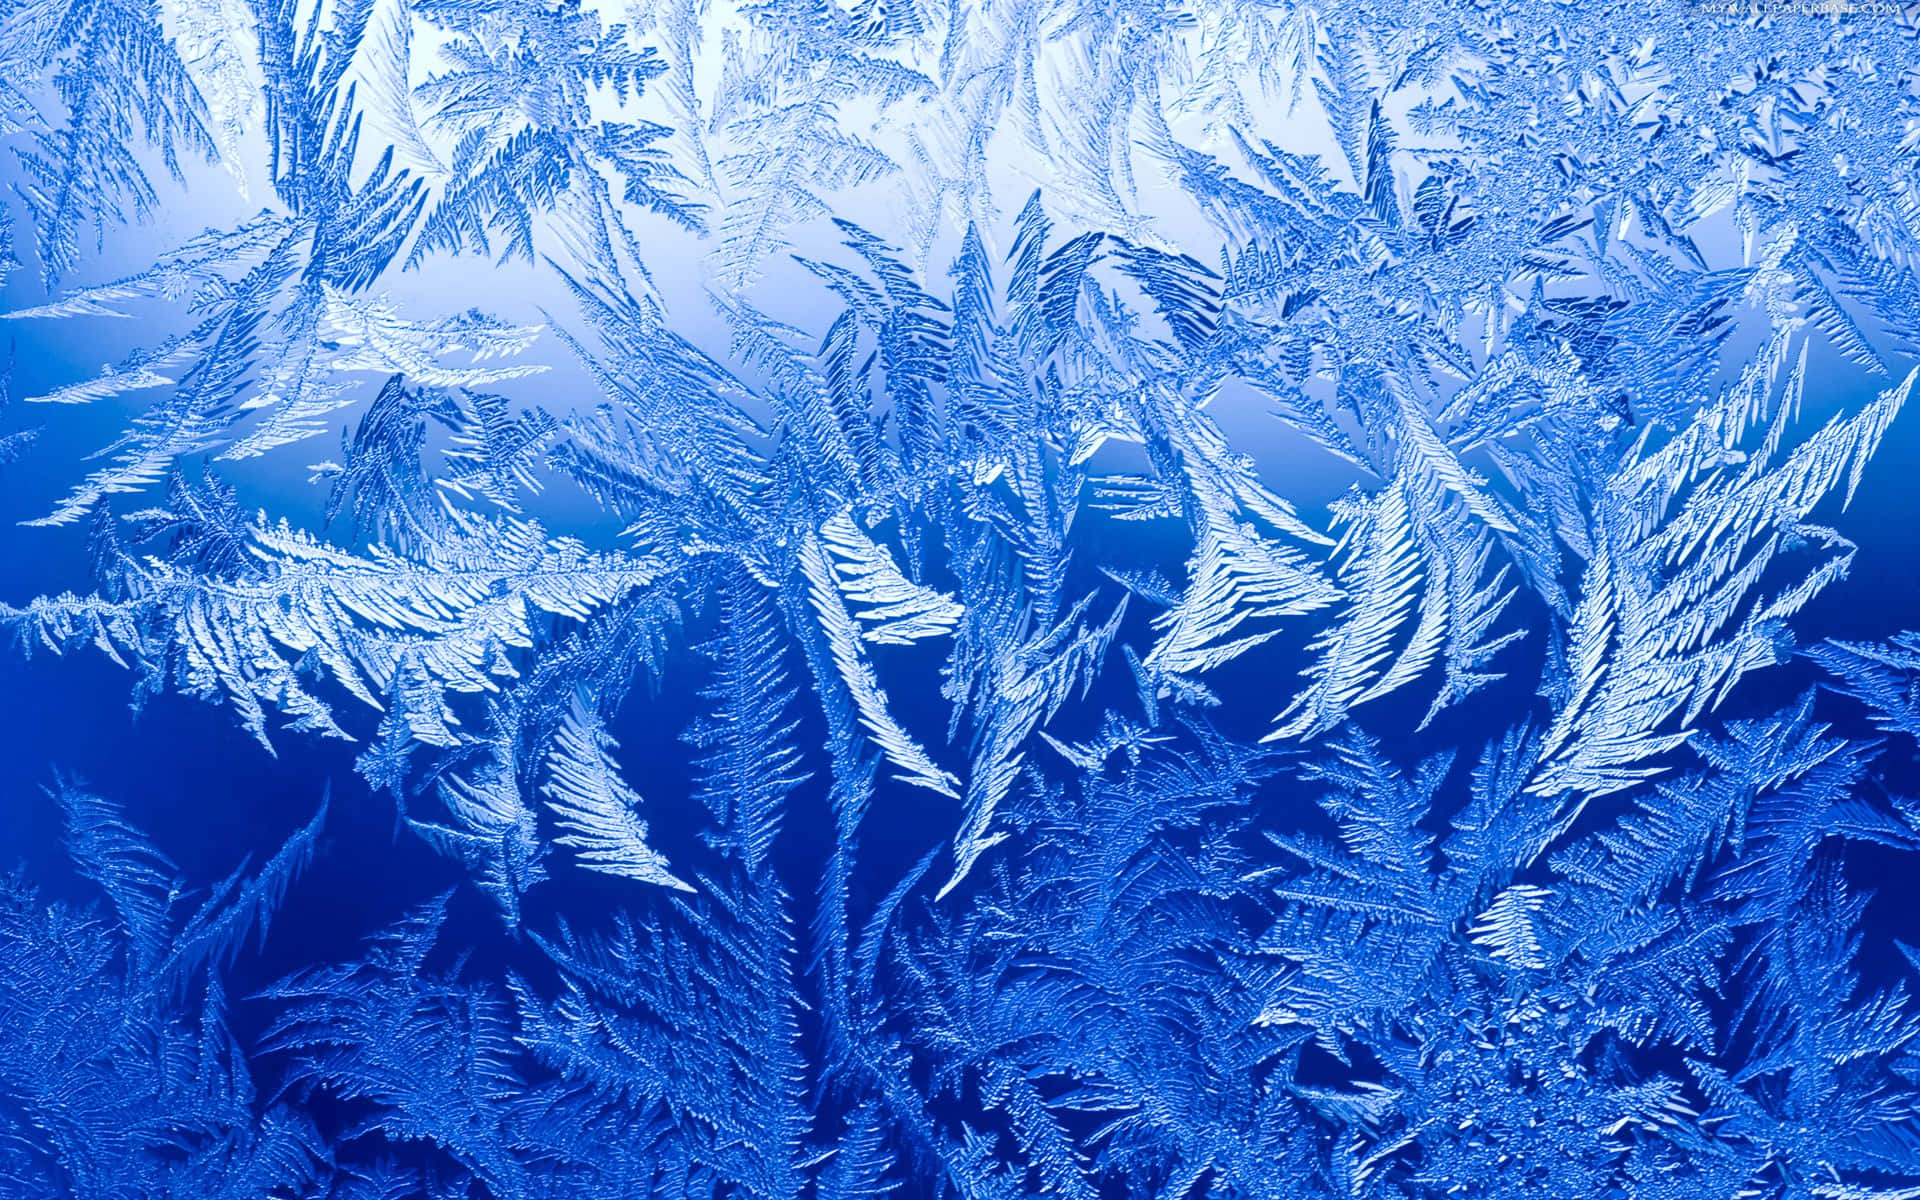 A Blue Window With Ice Crystals On It